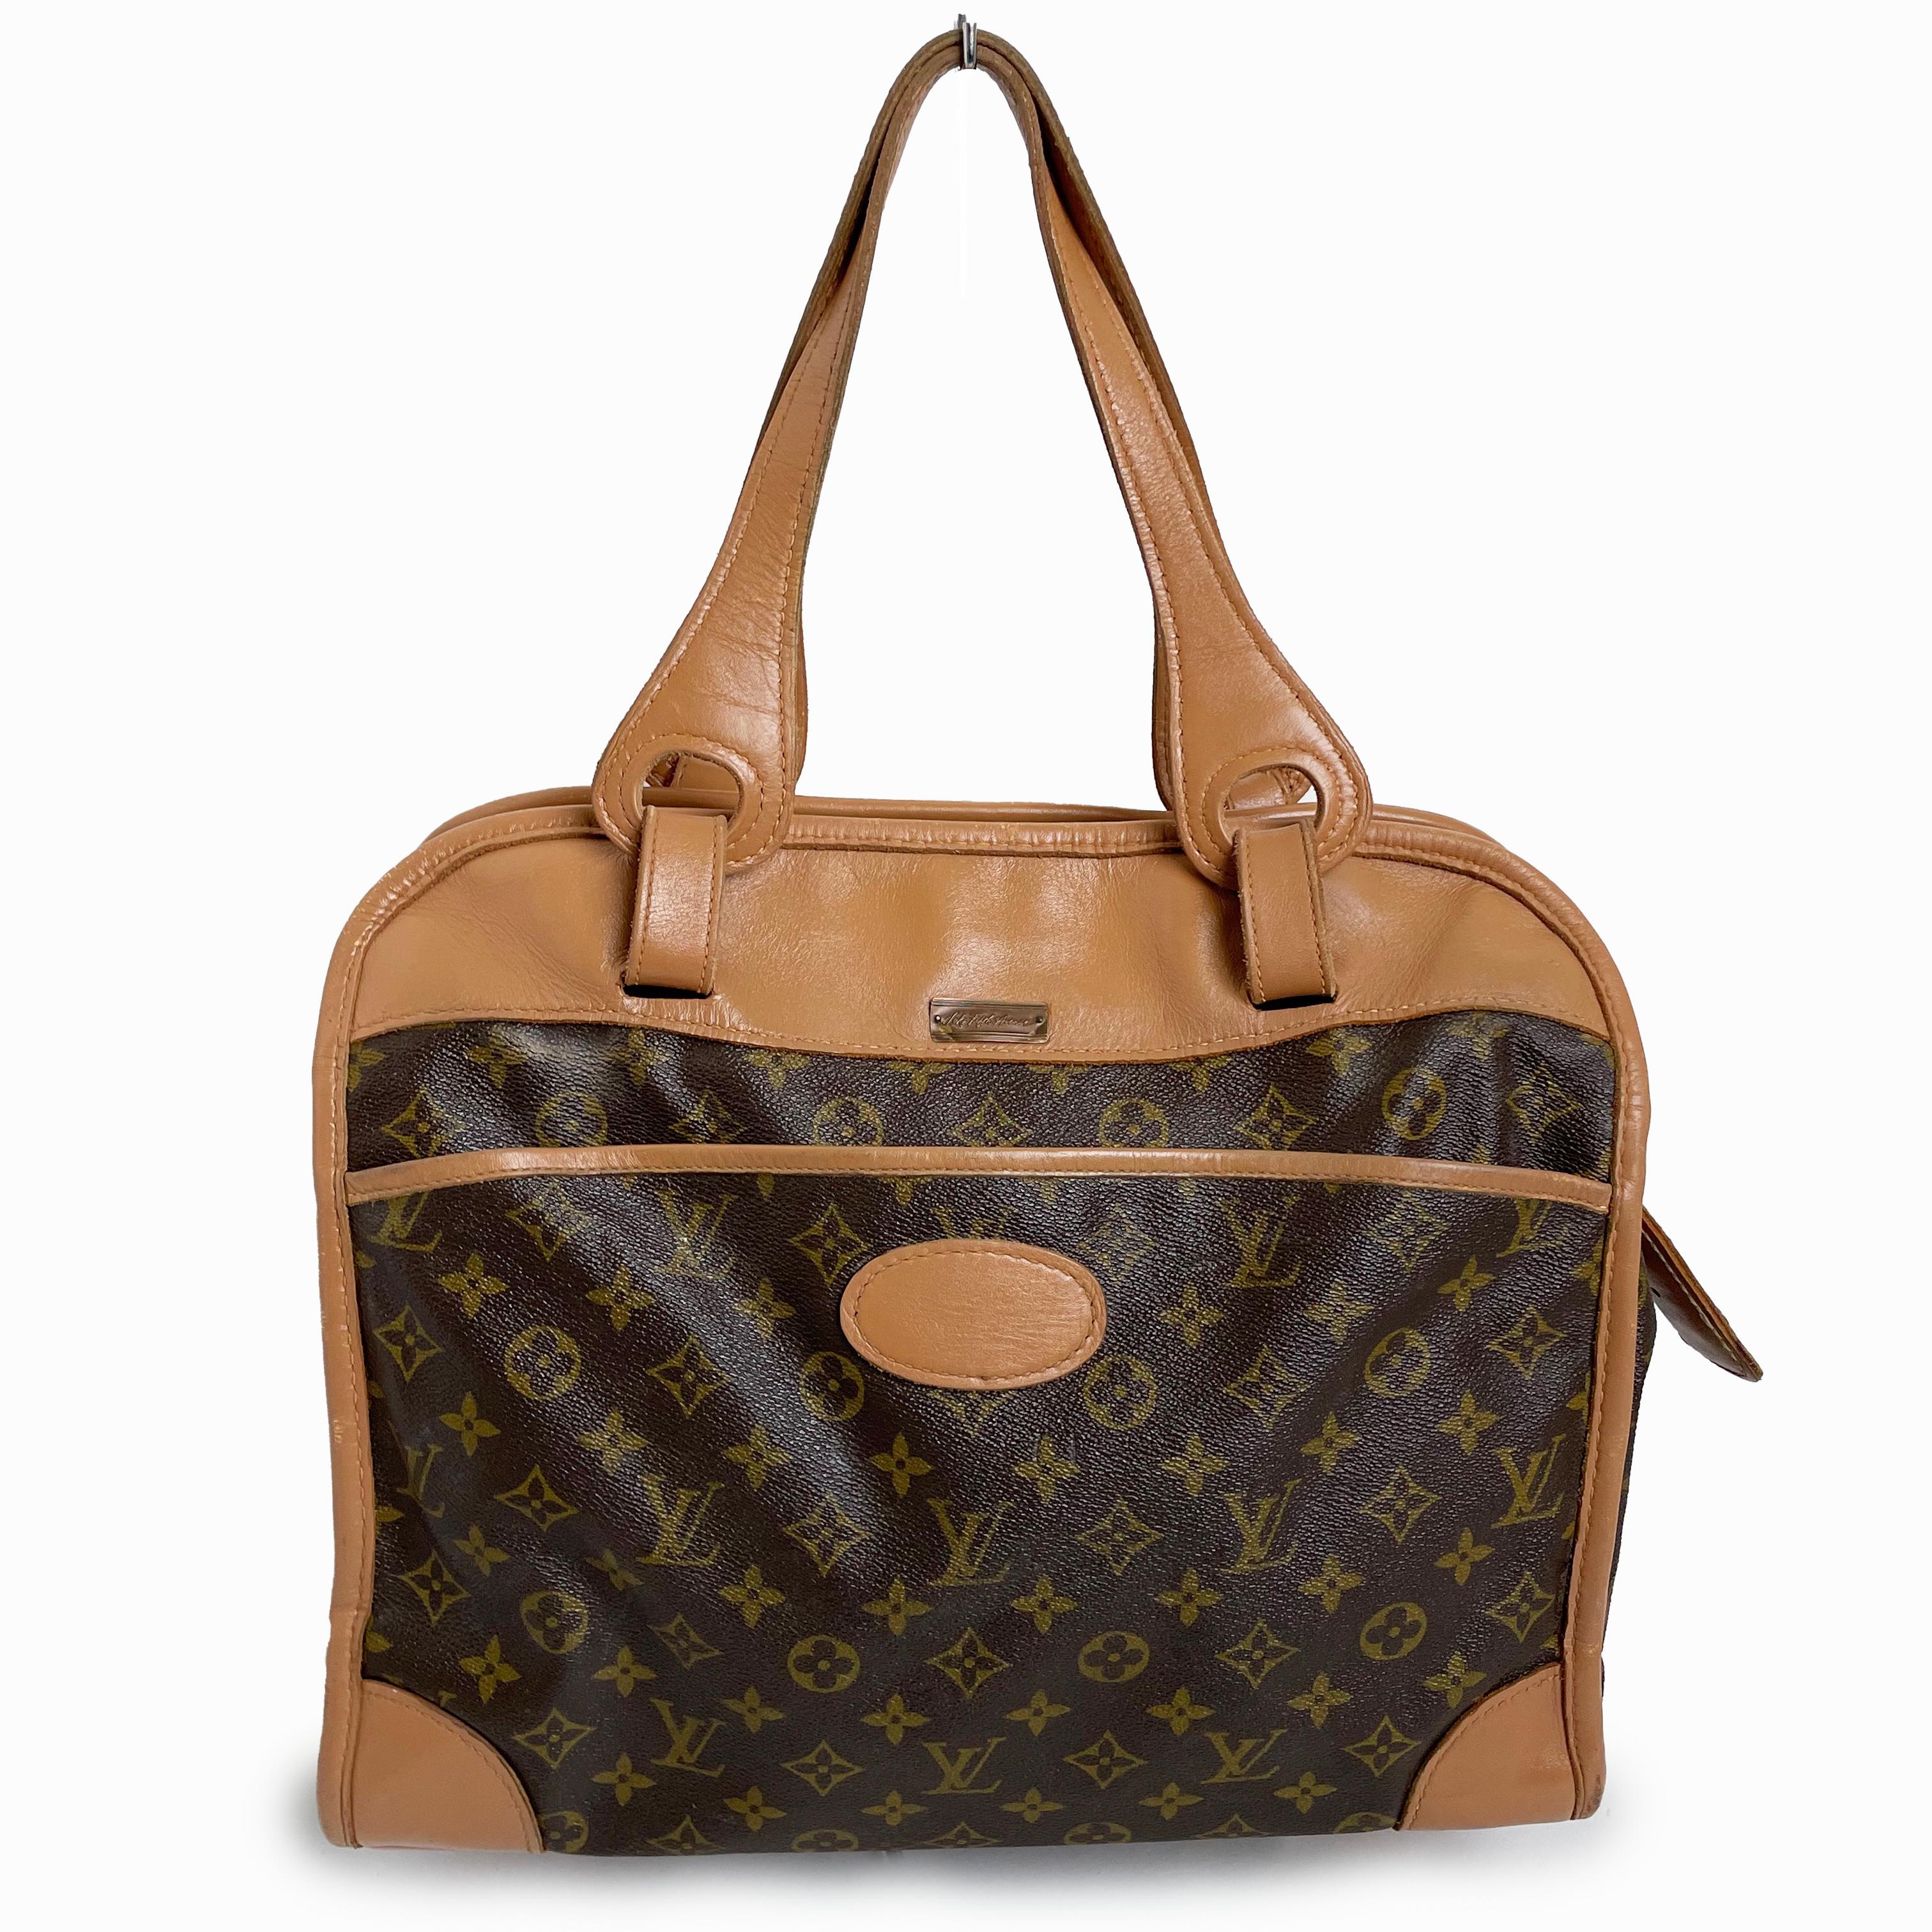 Louis Vuitton Tote Bag Travel Carry On French Luggage Co Saks 5th Ave Vintage  im Zustand „Gut“ im Angebot in Port Saint Lucie, FL